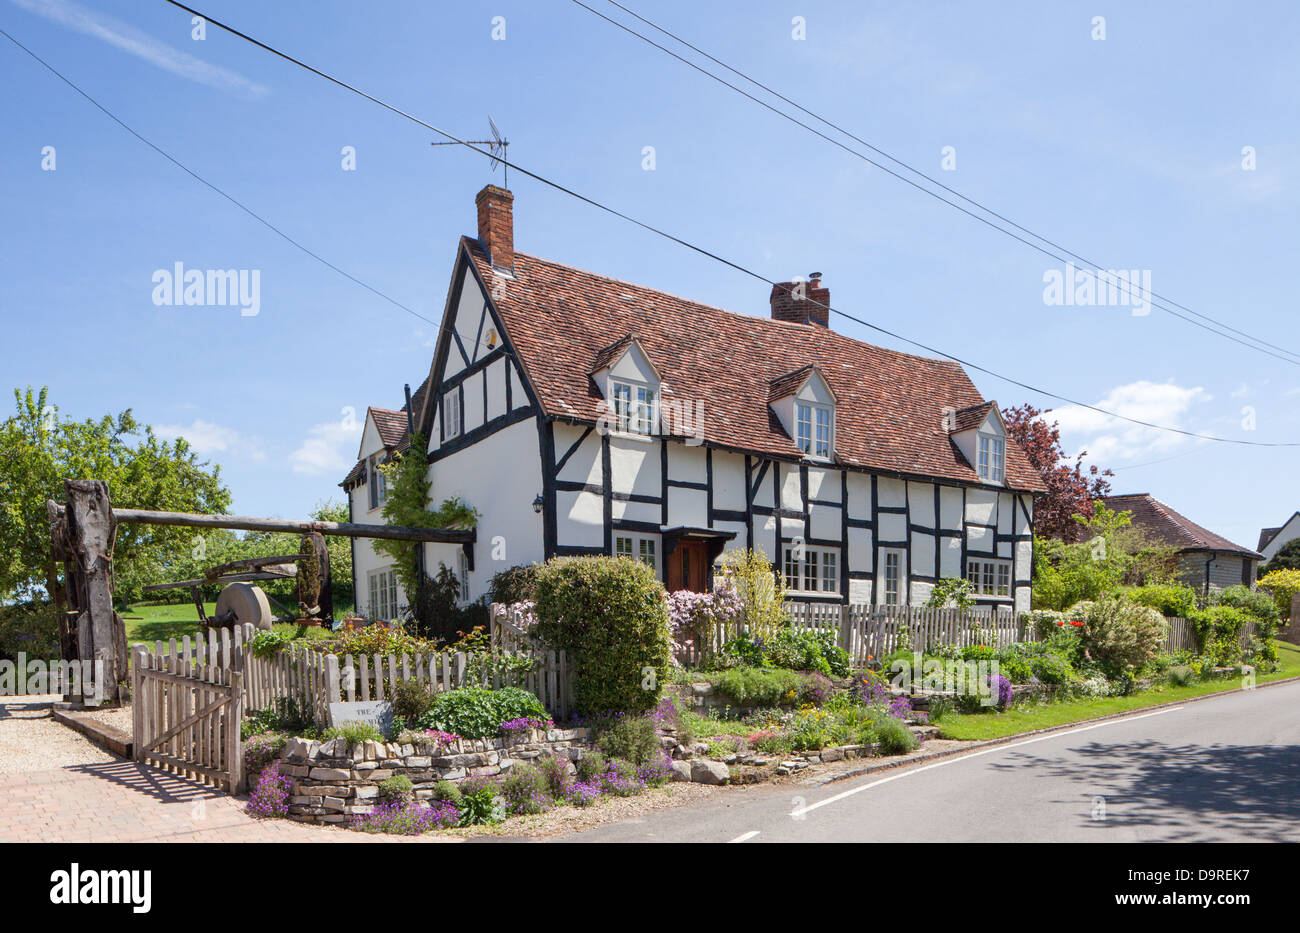 Timber framed cottage with telephone and power lines spoiling the view, Warwickshire, England, UK Stock Photo